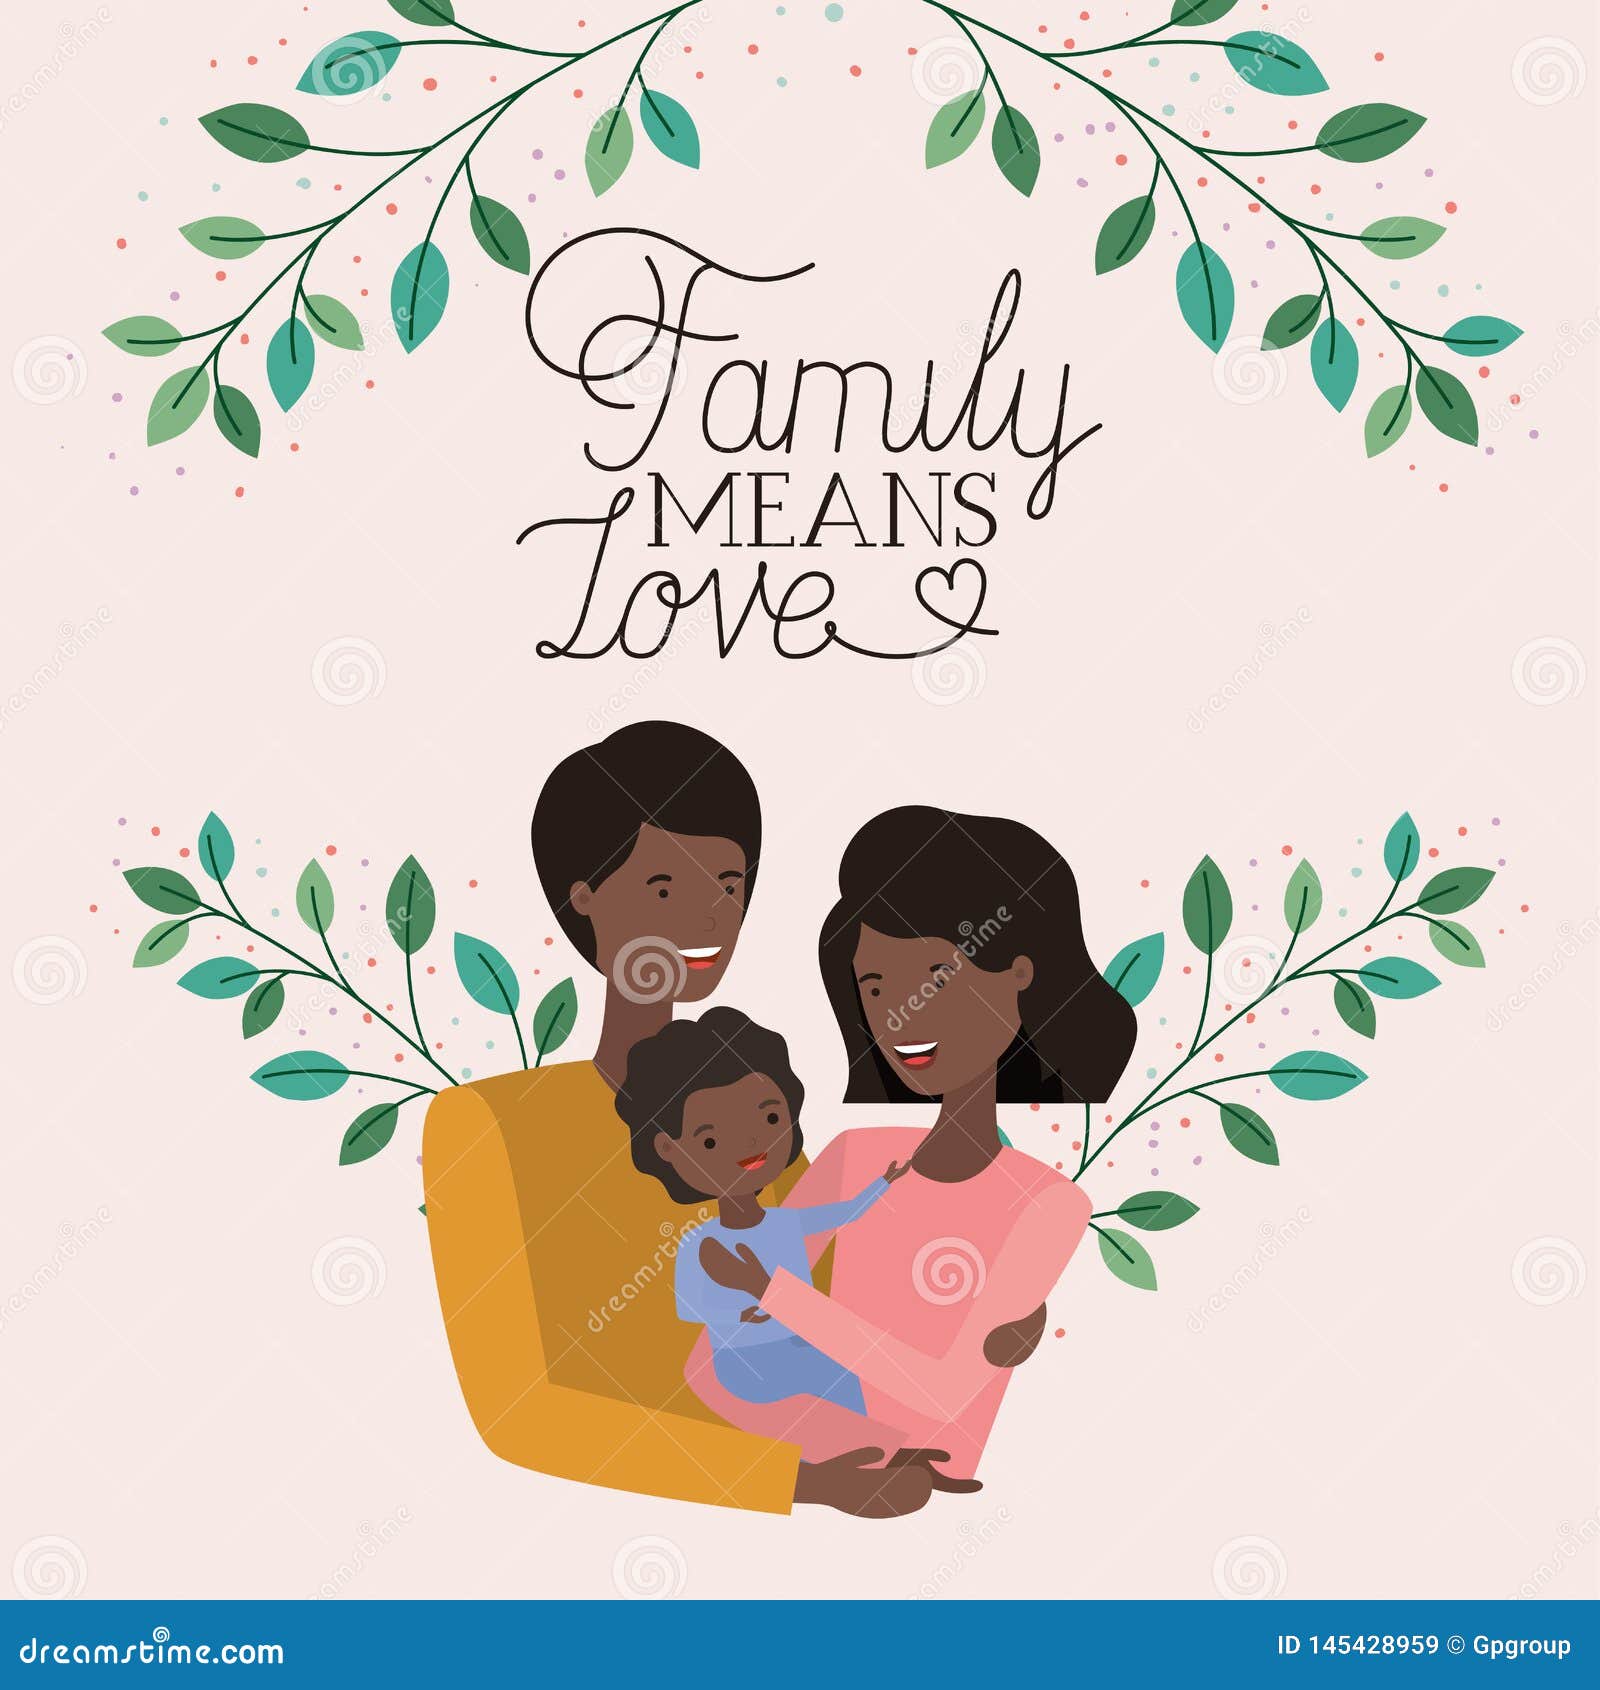 Family Day Graphics, Designs & Templates | GraphicRiver